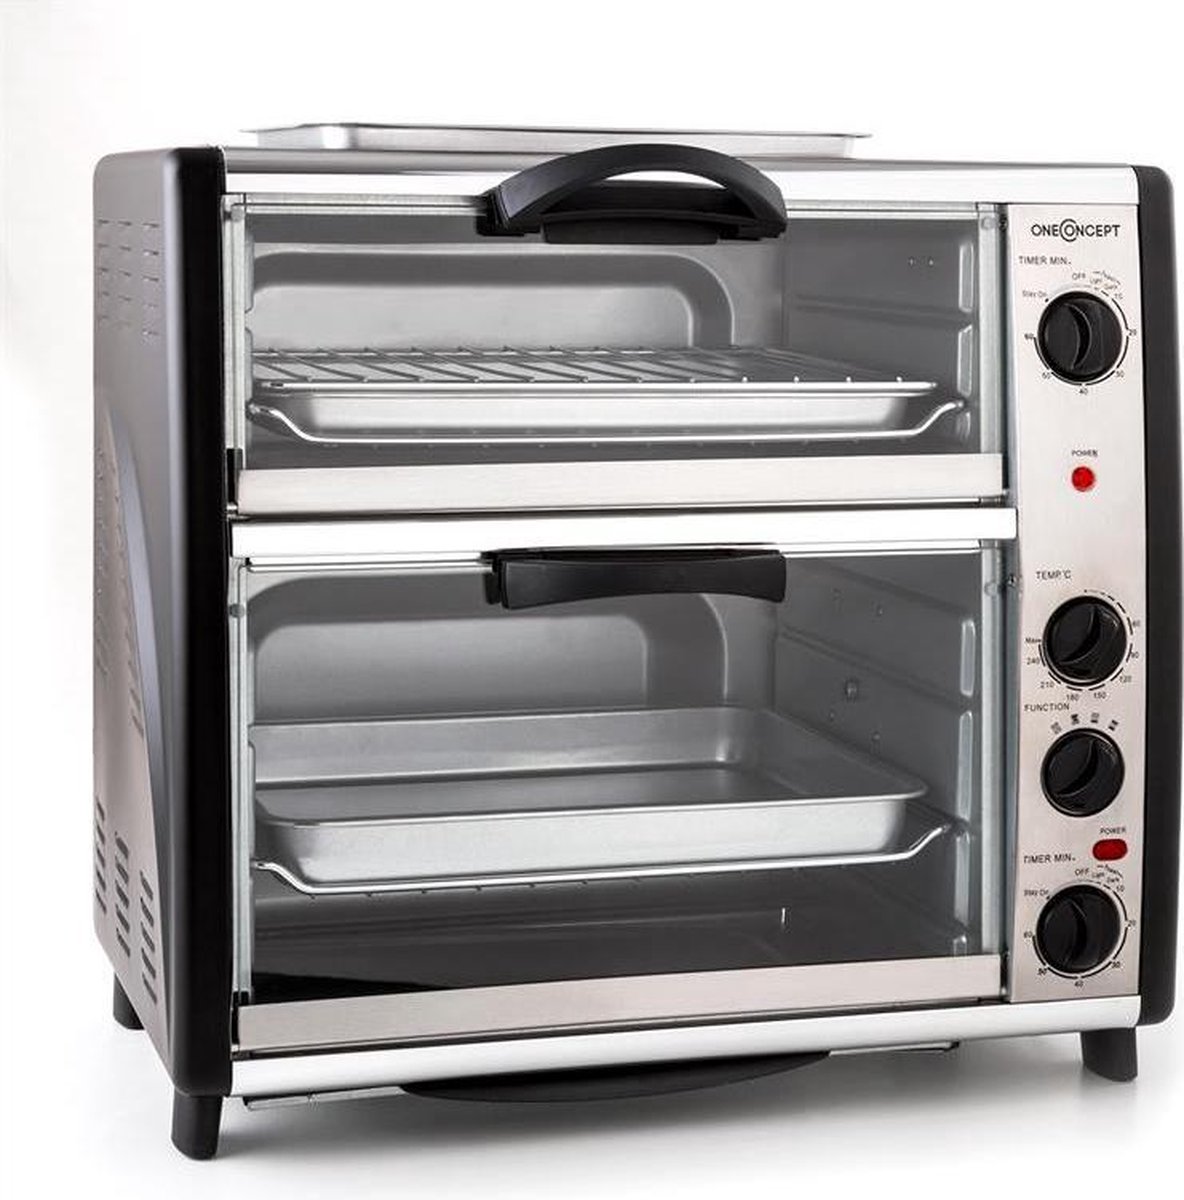 All-You-Can-Eat Double Oven Grill 42 liter 2350 watt